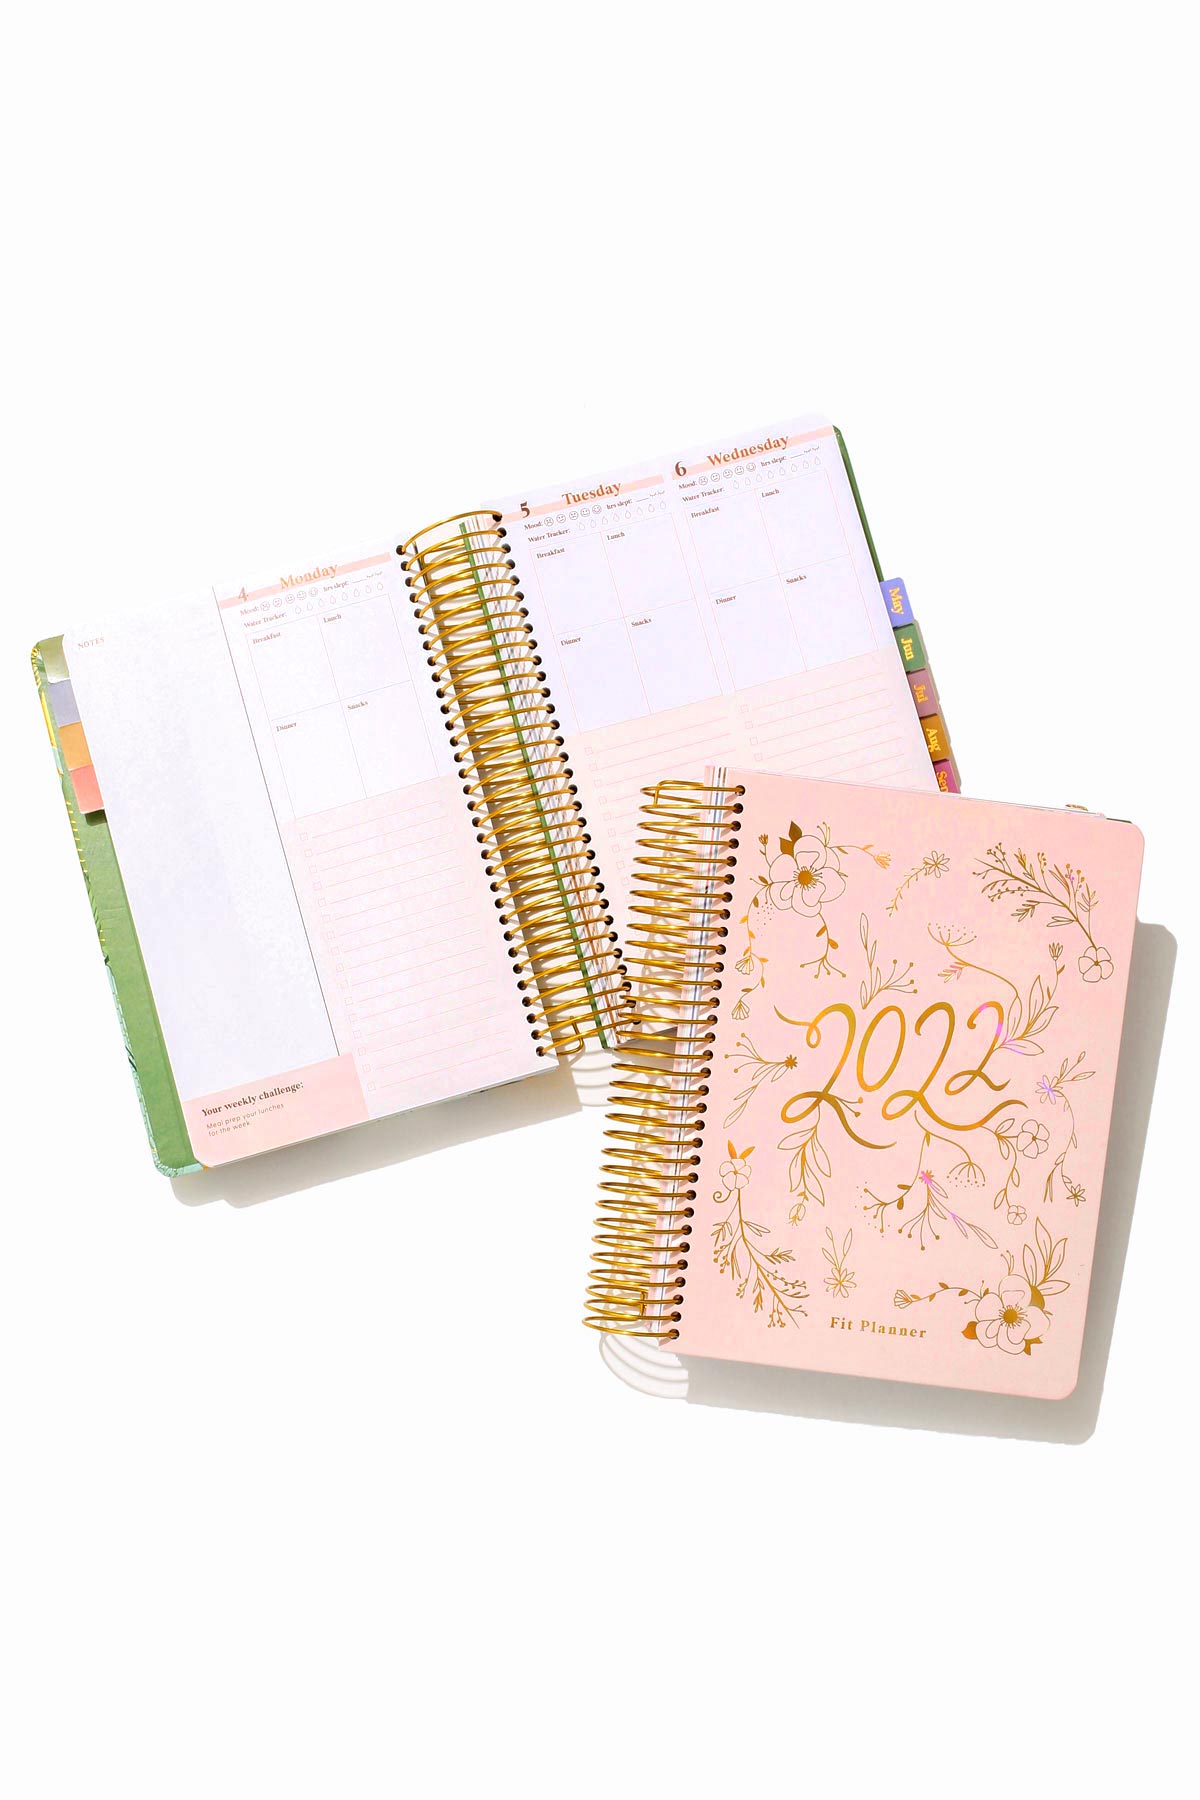 Stacked And Packed Calendar 2022 The 2022 Fit Planner Is Hereeee!!! - Blogilates